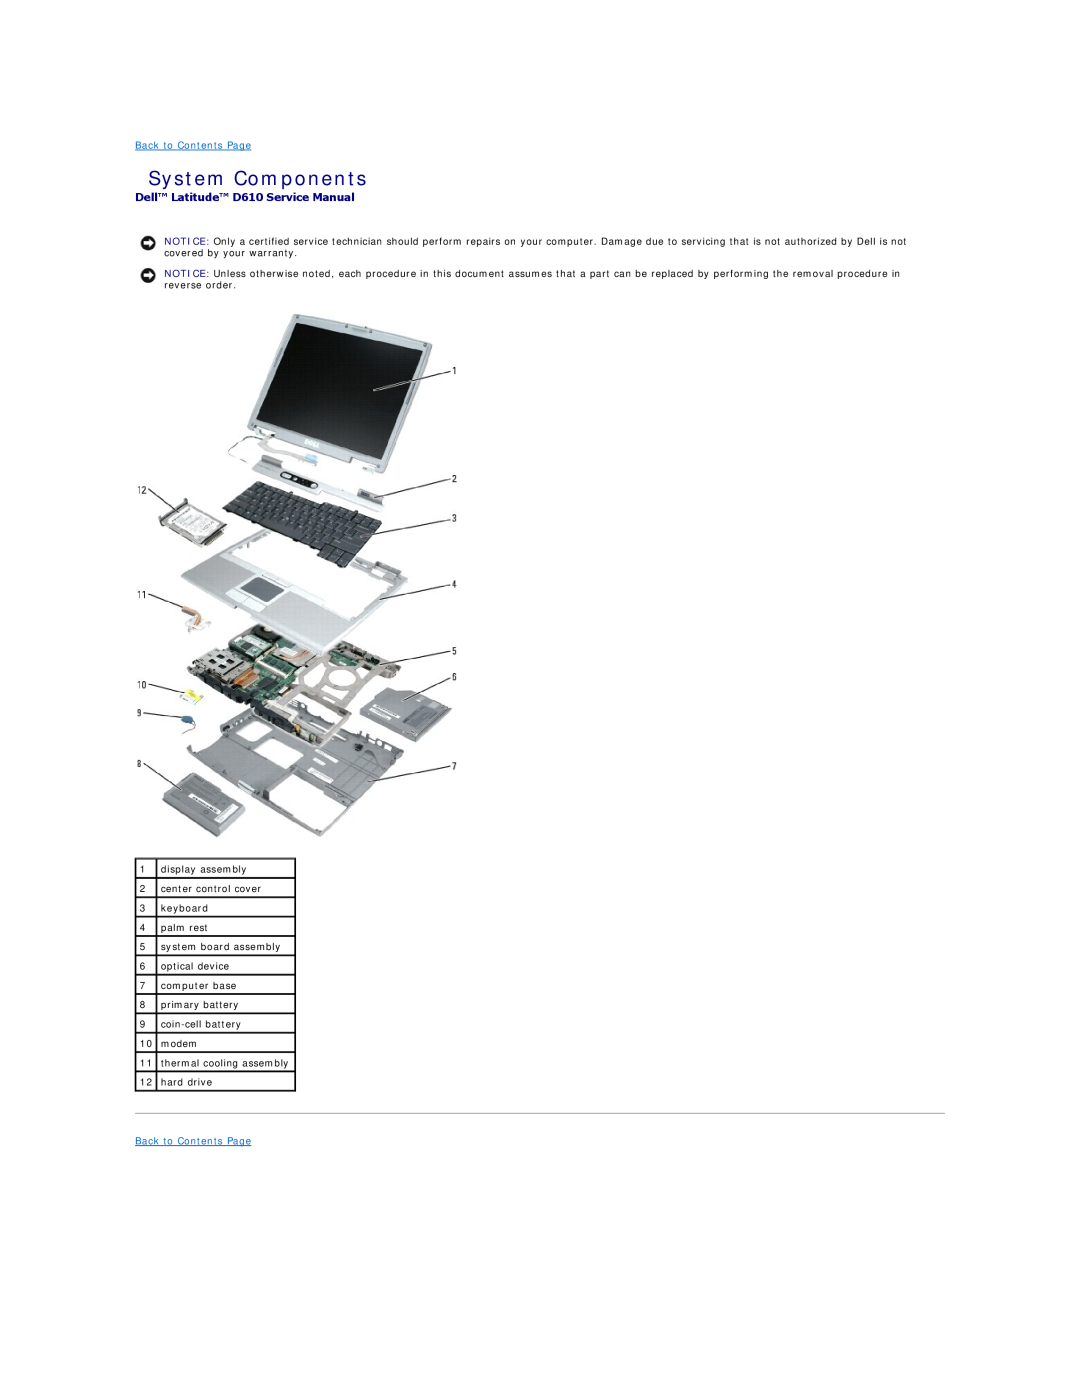 Dell manual System Components, Dell Latitude D610 Service Manual, Back to Contents Page 